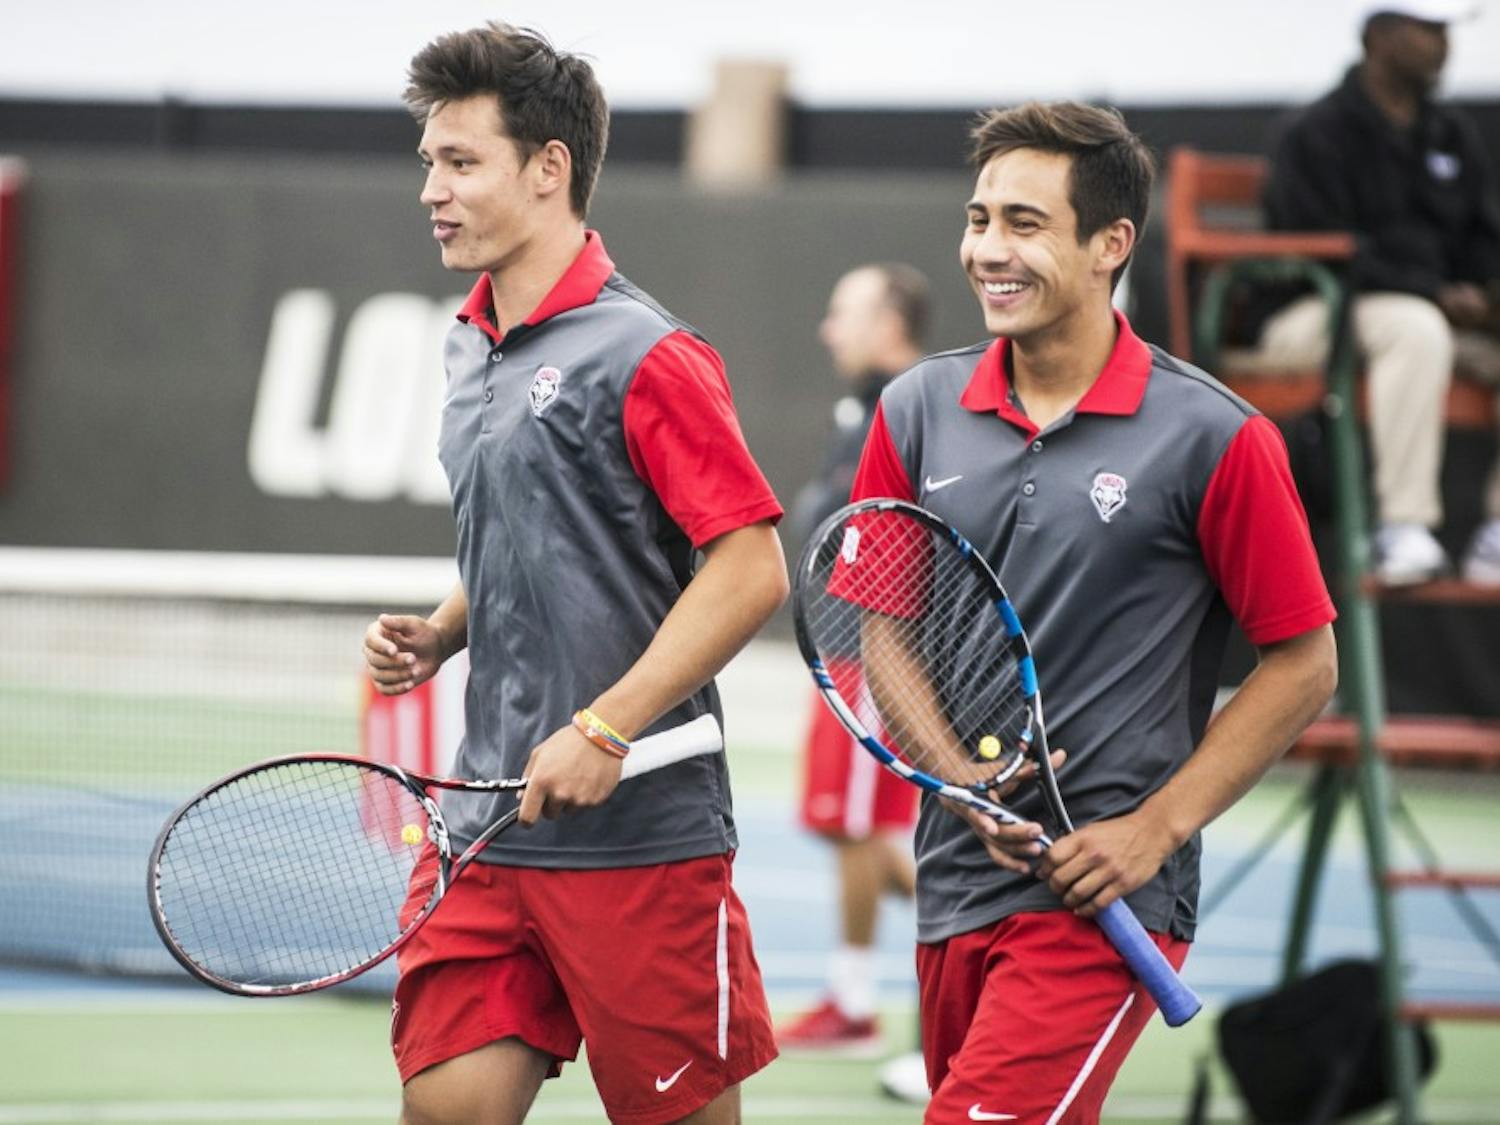 Freshman Ricky Hernandez-Tong (left) and sophomore Jorge Escutia walk of the court after finishing a doubles match April 17, 2016 at the McKinnon Family Tennis Stadium.&nbsp;